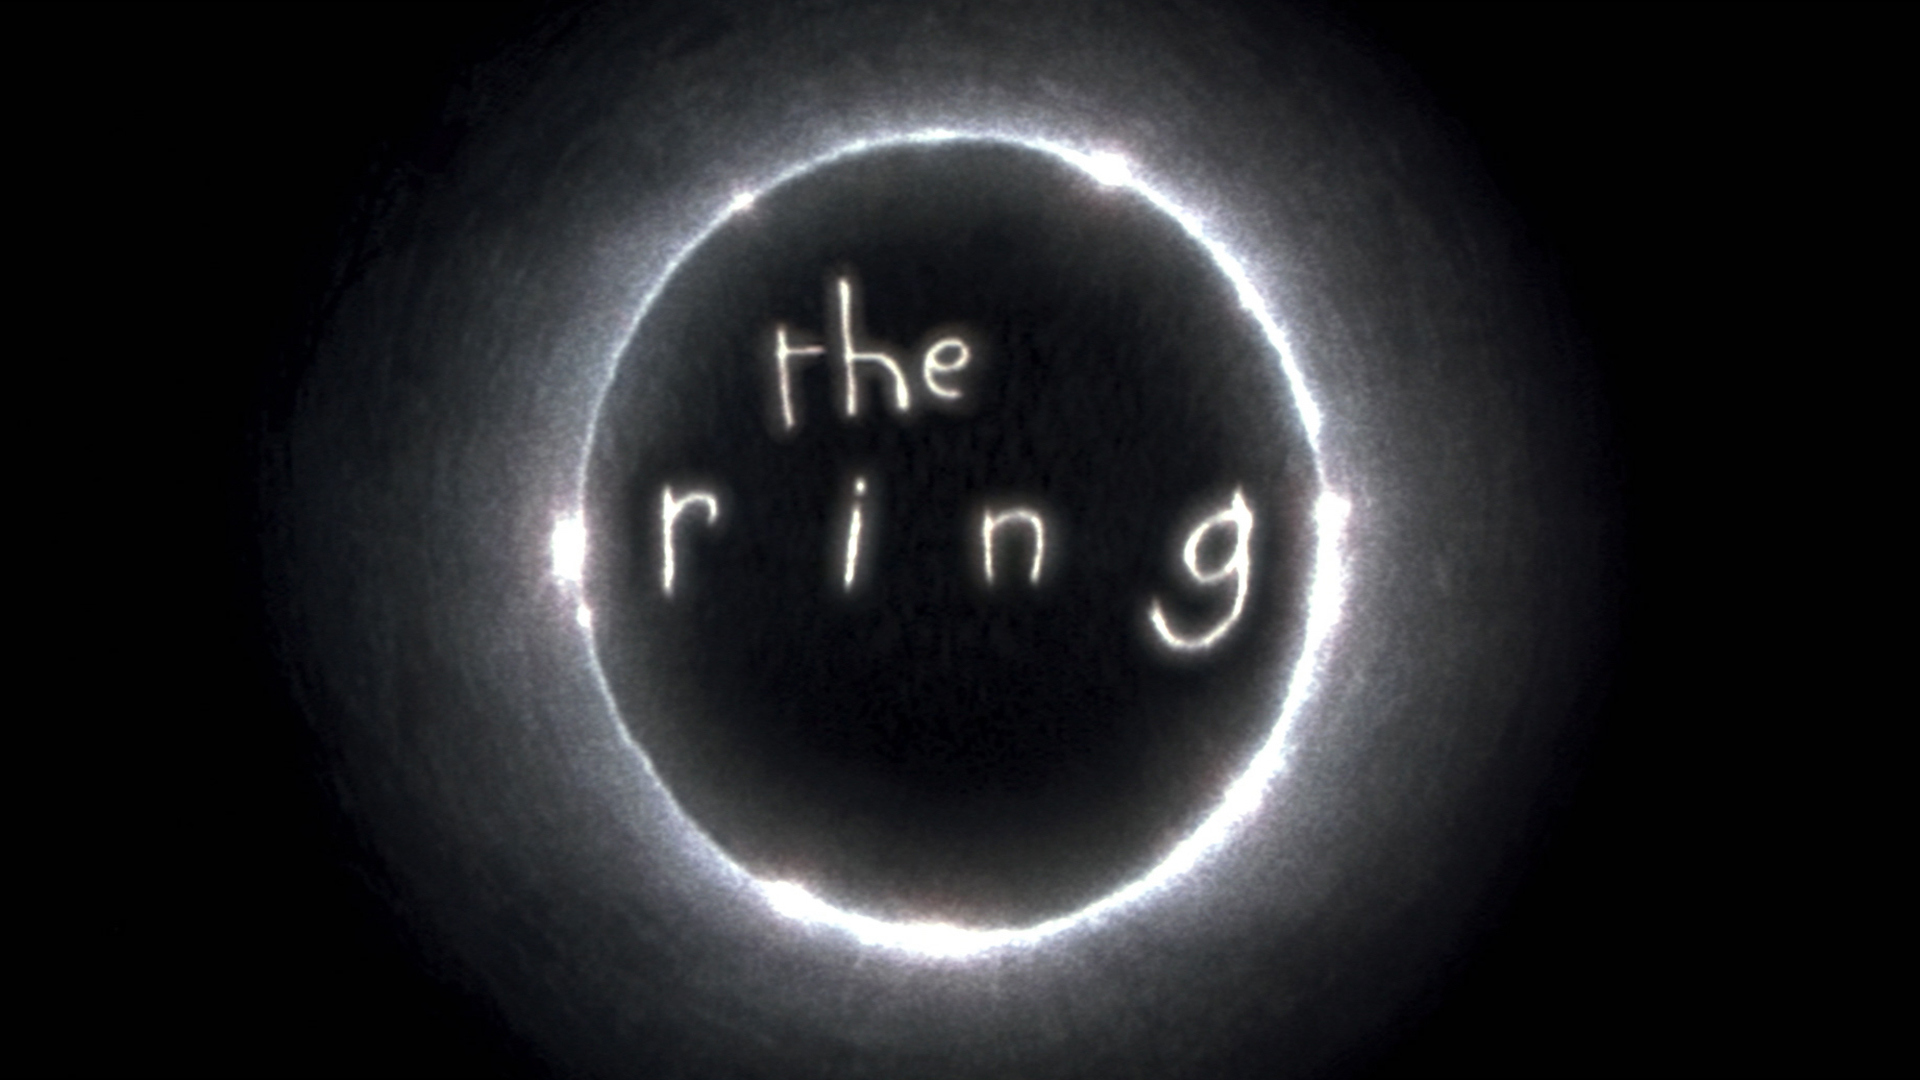 PARAMOUNT_The_Ring_TRAILER_16x9_181515_1